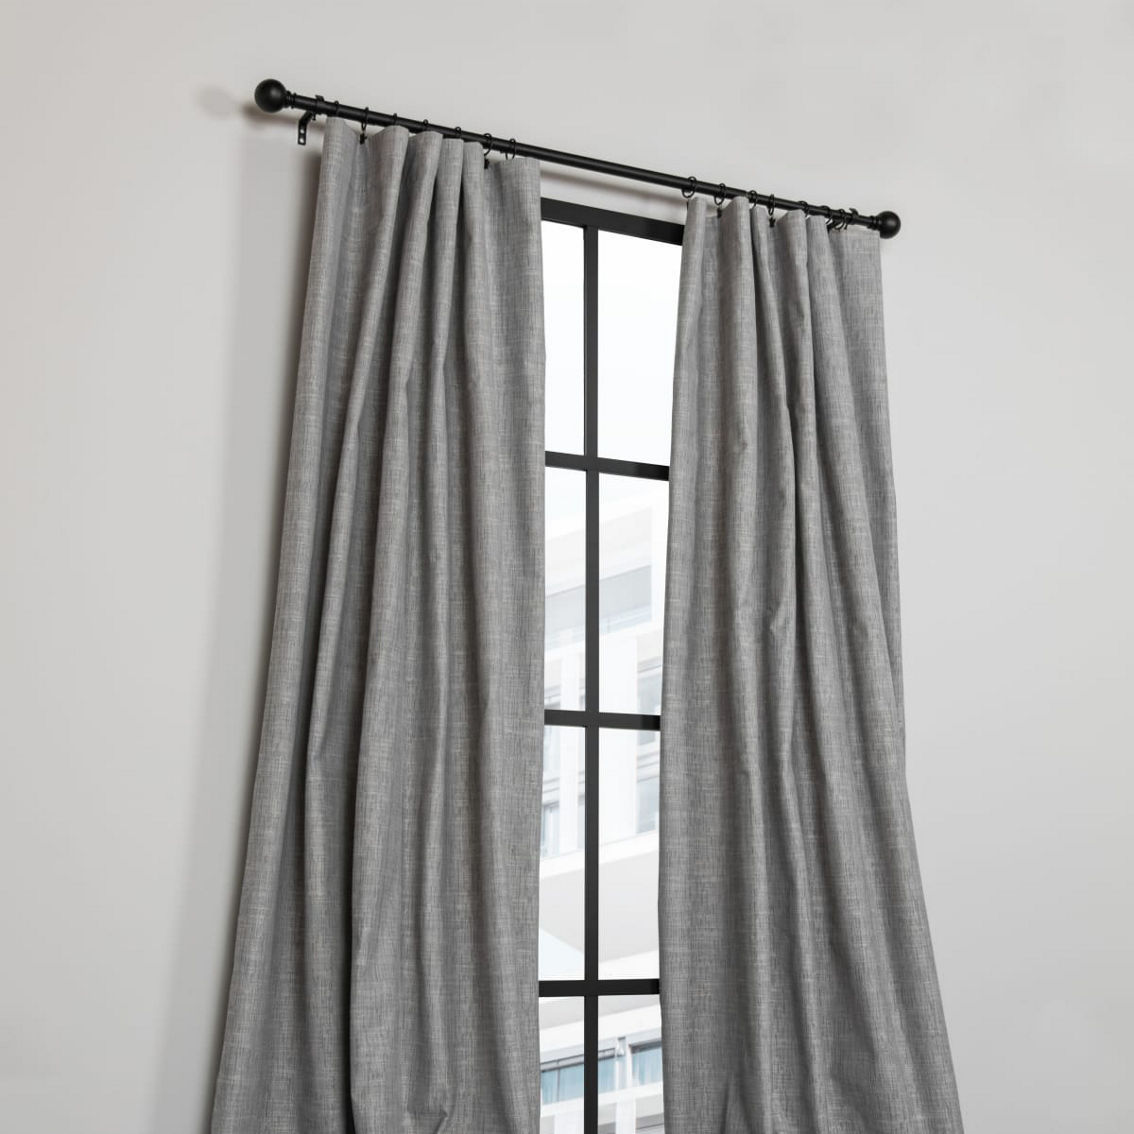 Manor Luxe Lucille Solid Blackout Thermal Rod Pocket Curtain, One Panel, 54 x 120in - Image 2 of 2